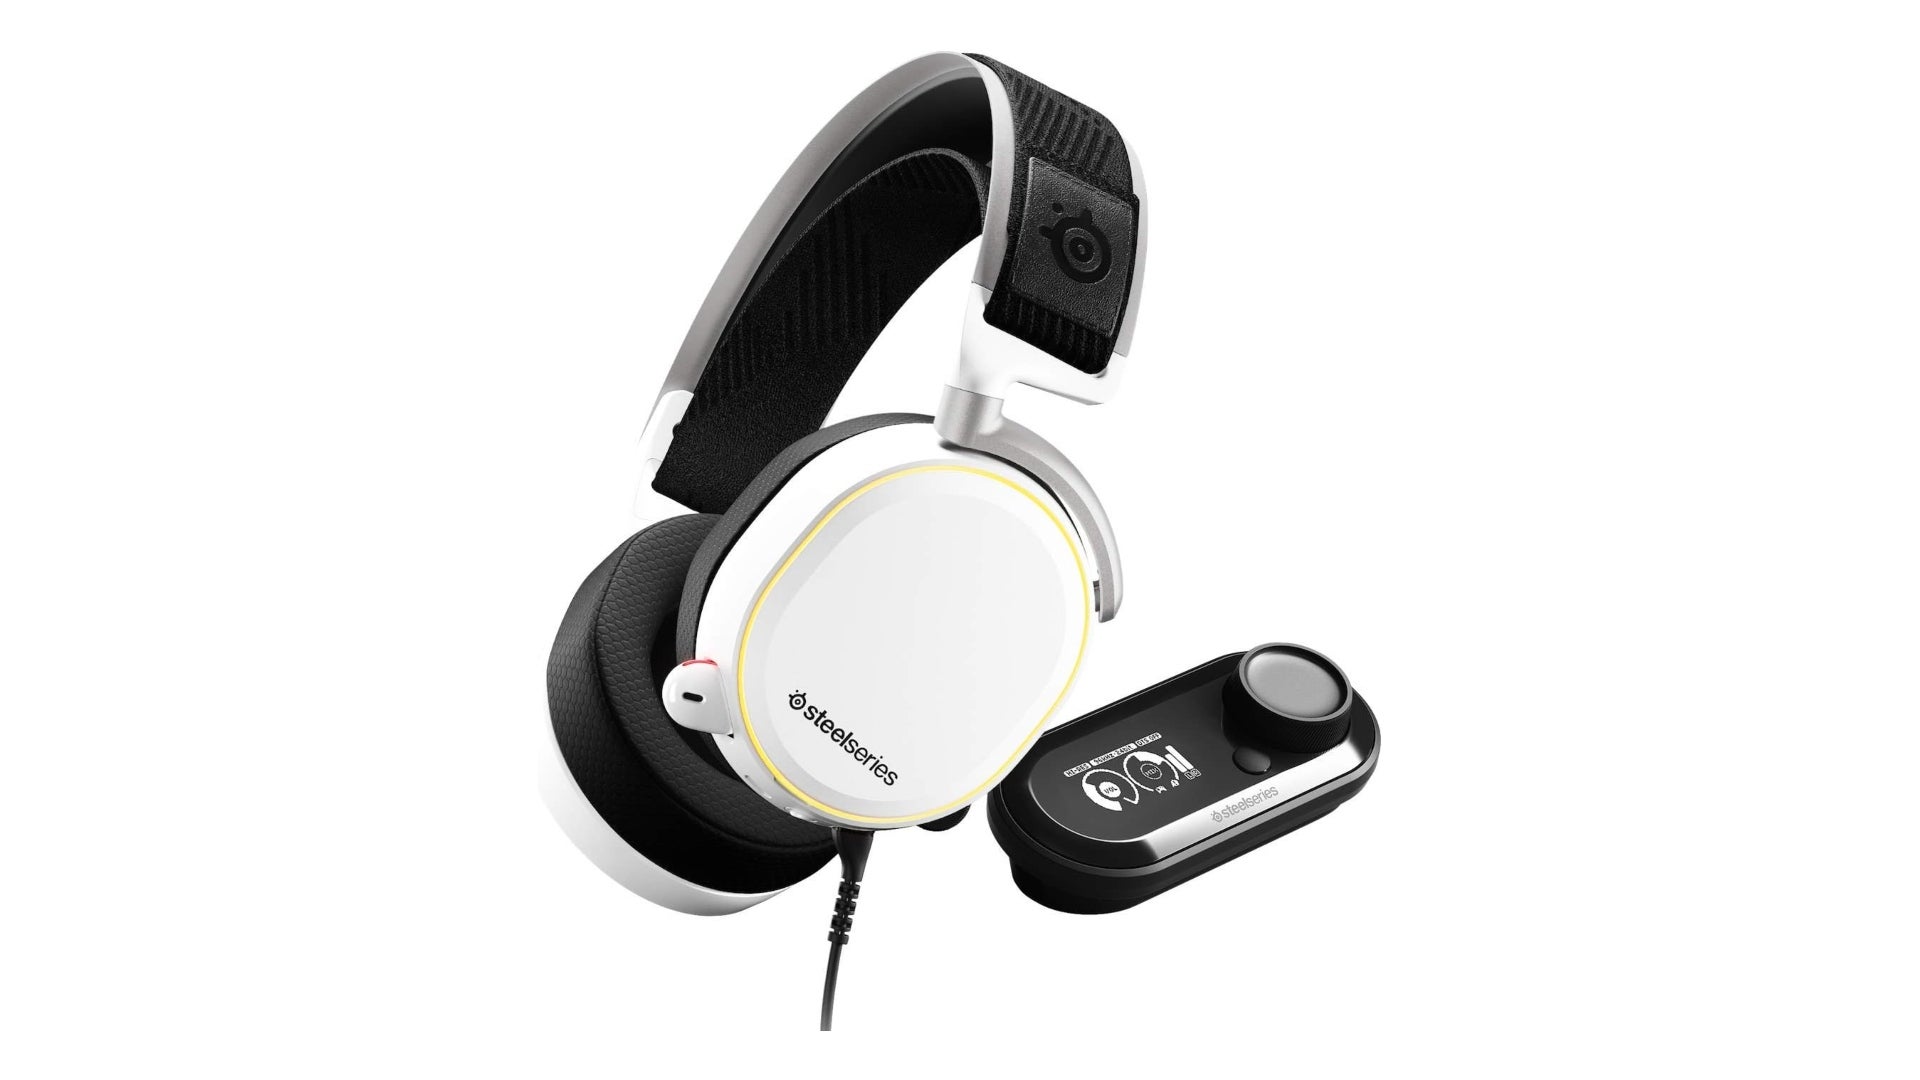 Grab the excellent SteelSeries Arctis Pro with GameDAC for £125